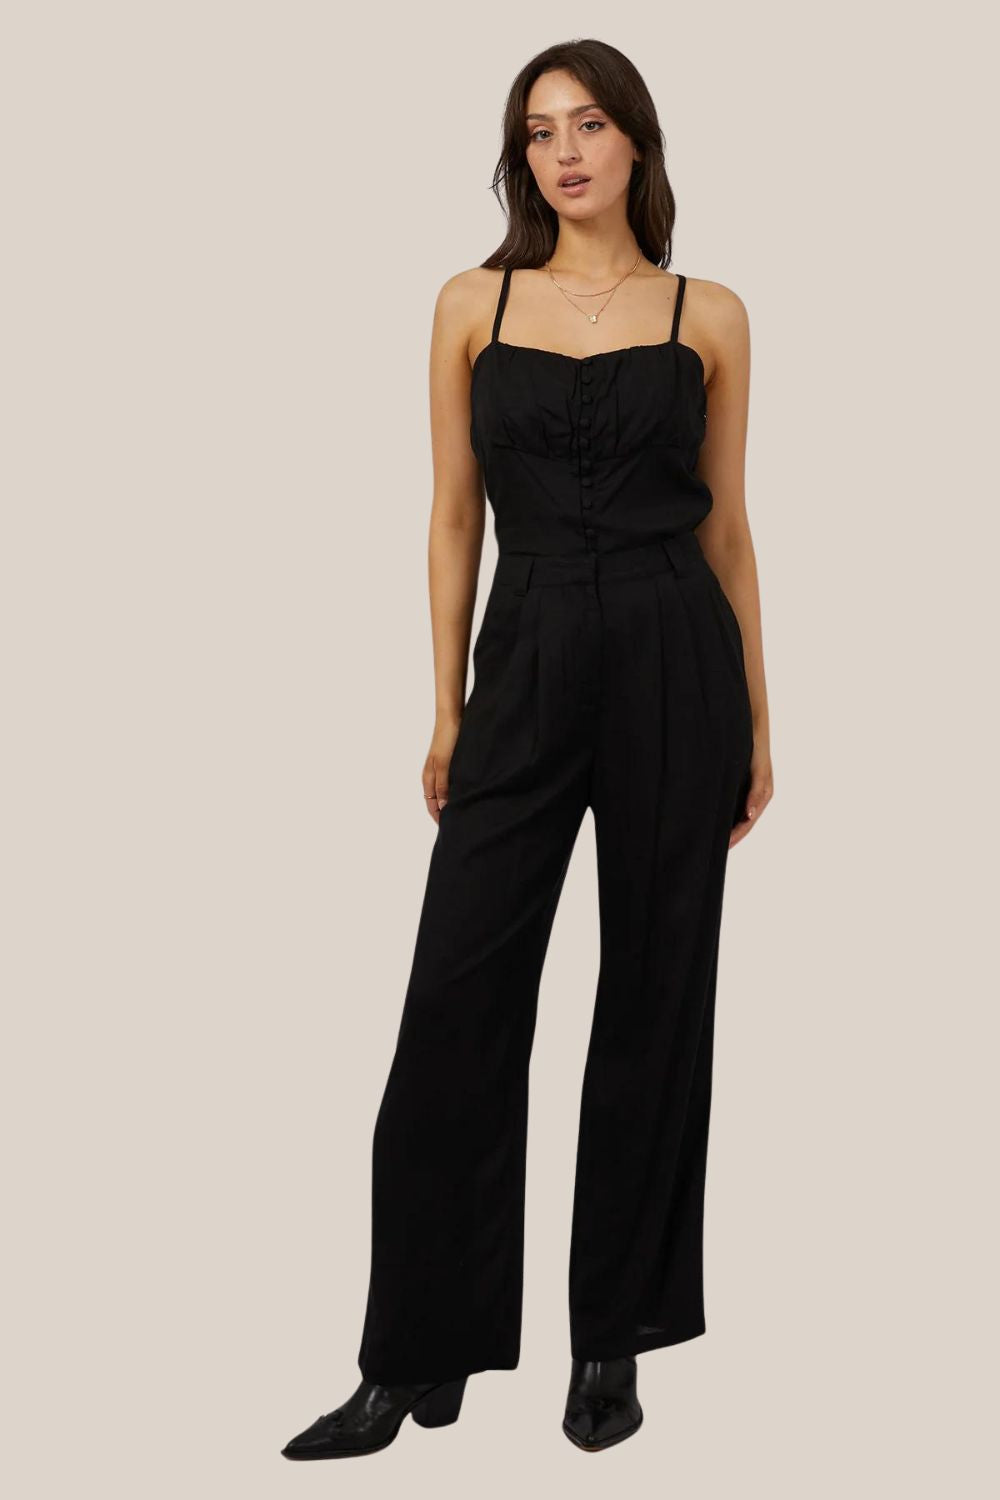 All About Eve Gracie Pant